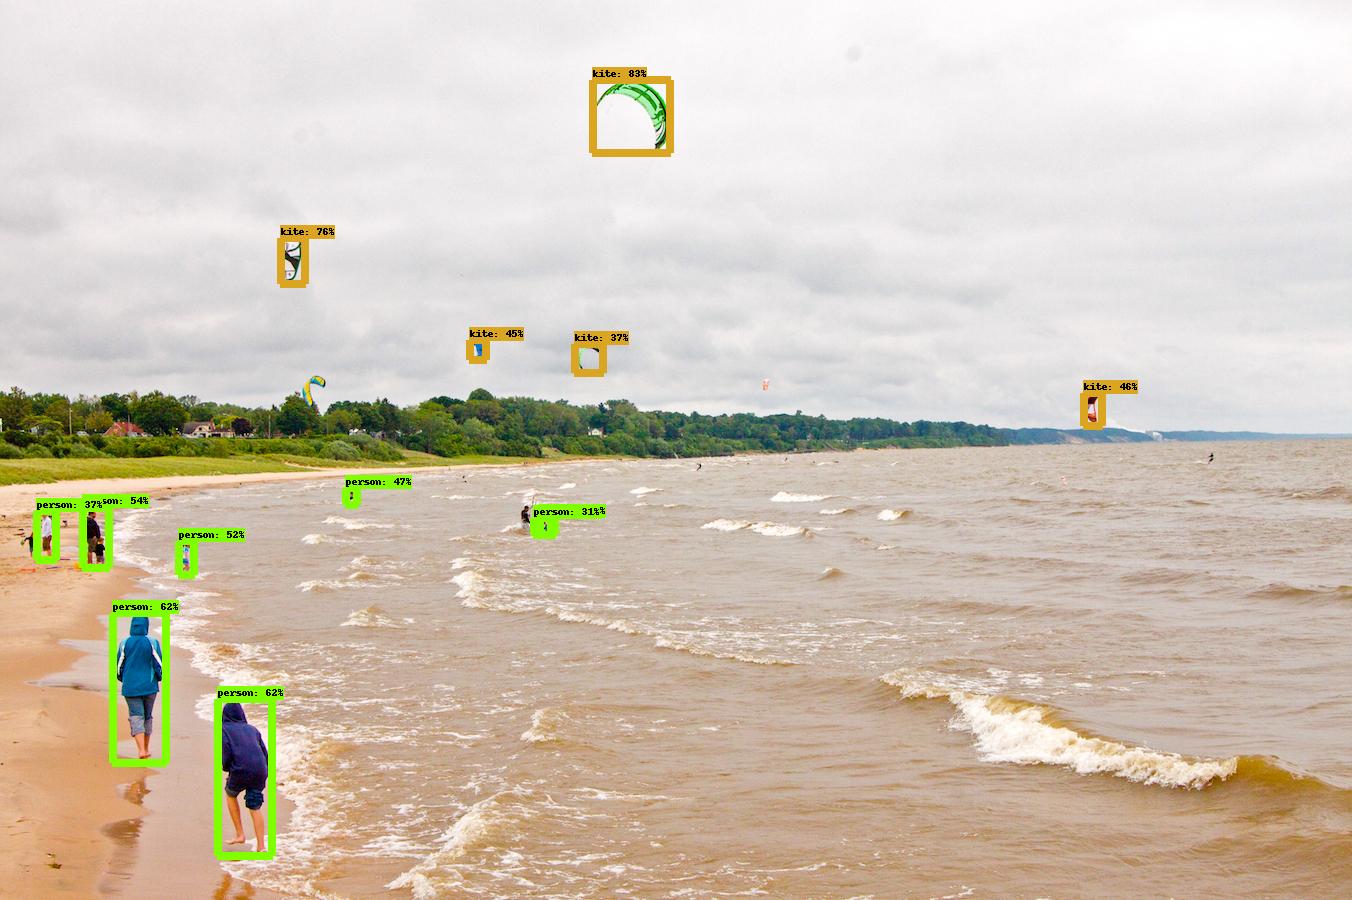 Beach photo of detected people and objects